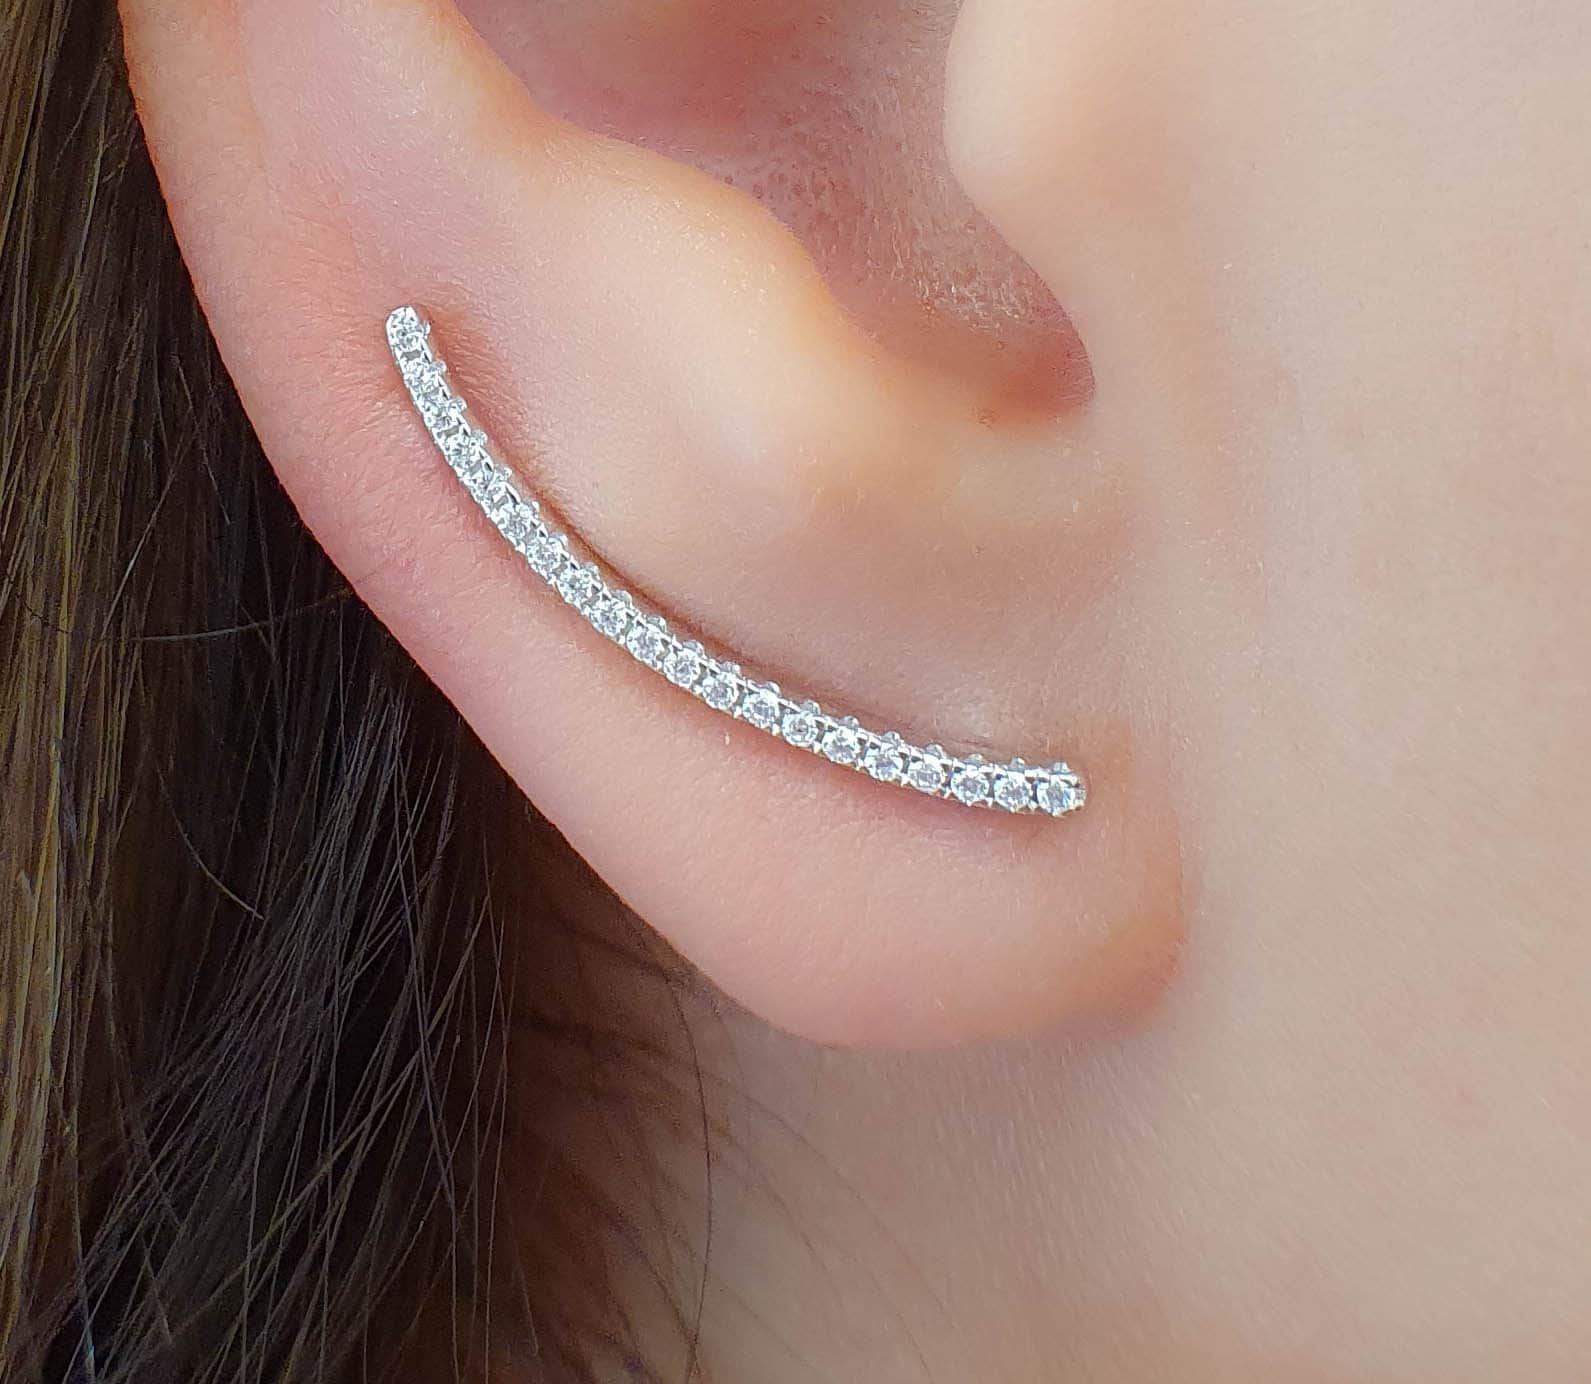 Tiny Faux Diamond Sterling Silver Post Ear Climber Fashion Earrings for Women or Girls PAVOI 14K Gold Plated Sterling Silver Post Mini Constellation Cubic Zirconia Ear Crawler Earrings 